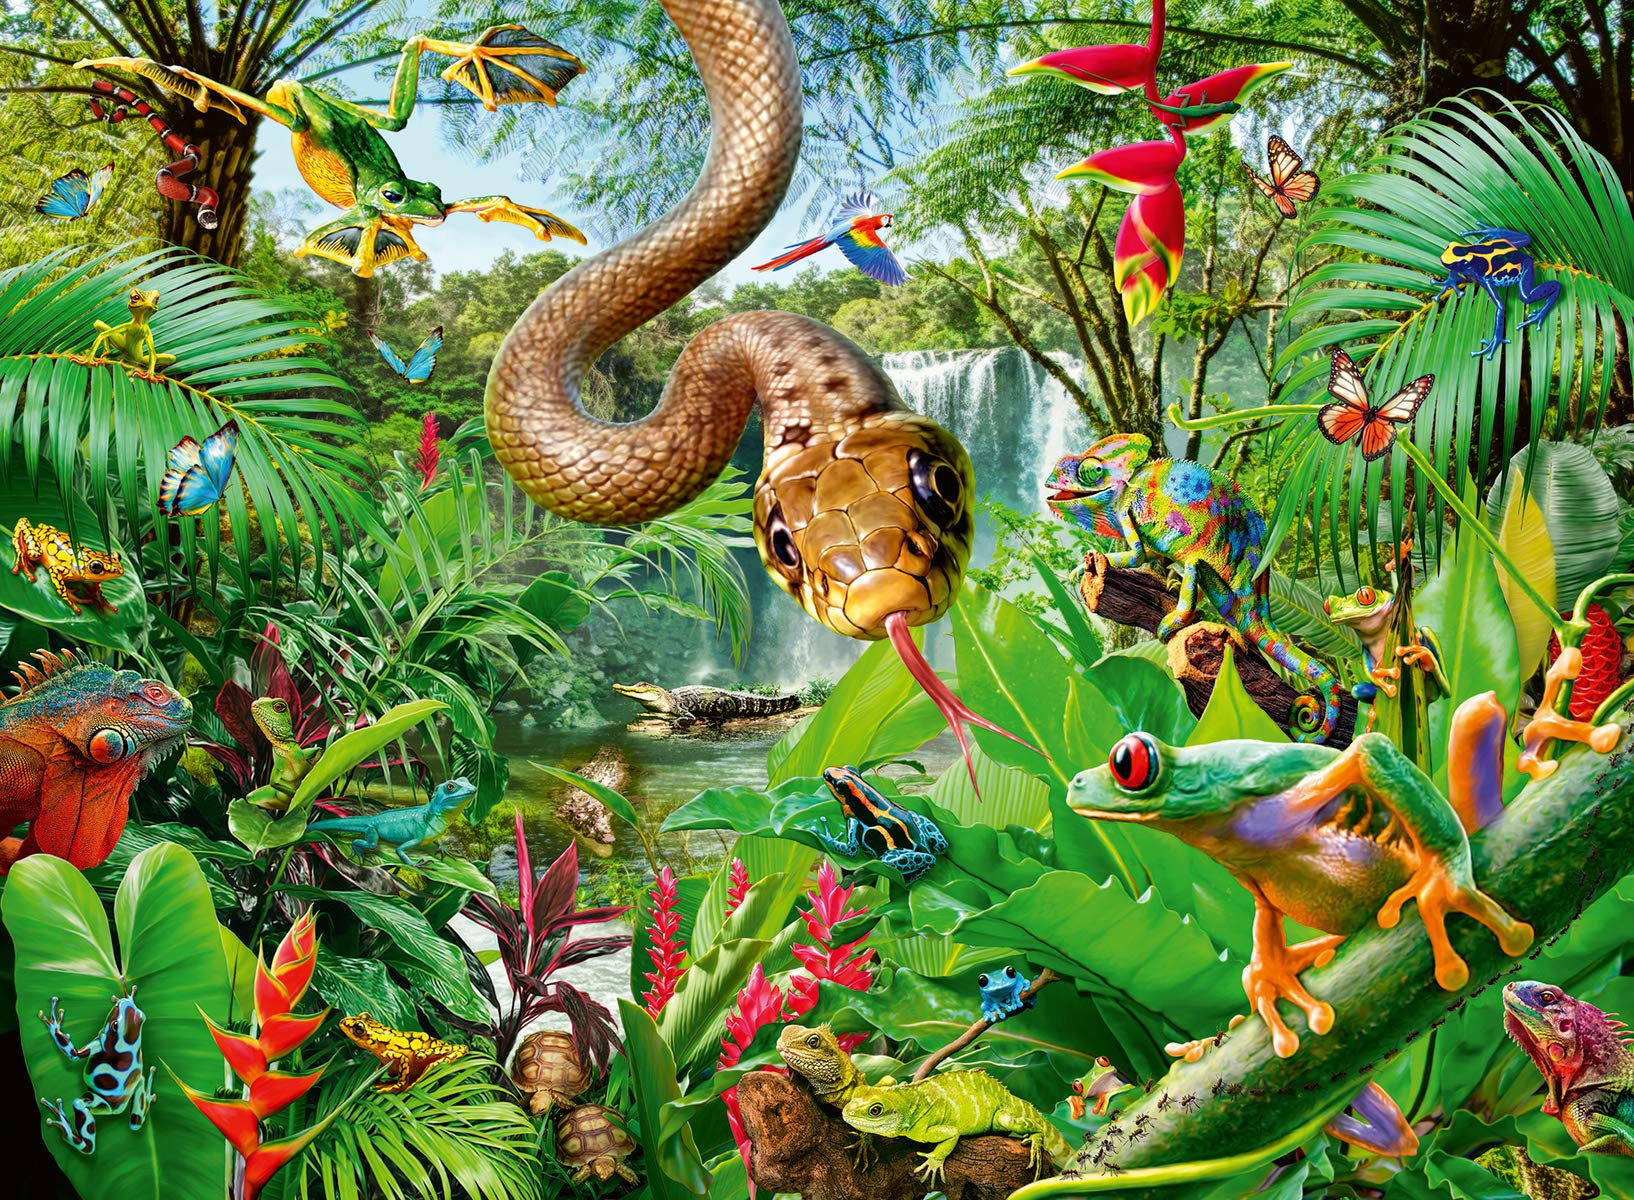 Ravensburger Reptile Resort 300 XXL Piece Jigsaw Puzzle for Kids - 12978 - Every Piece is Unique, Pieces Fit Together Perfectly